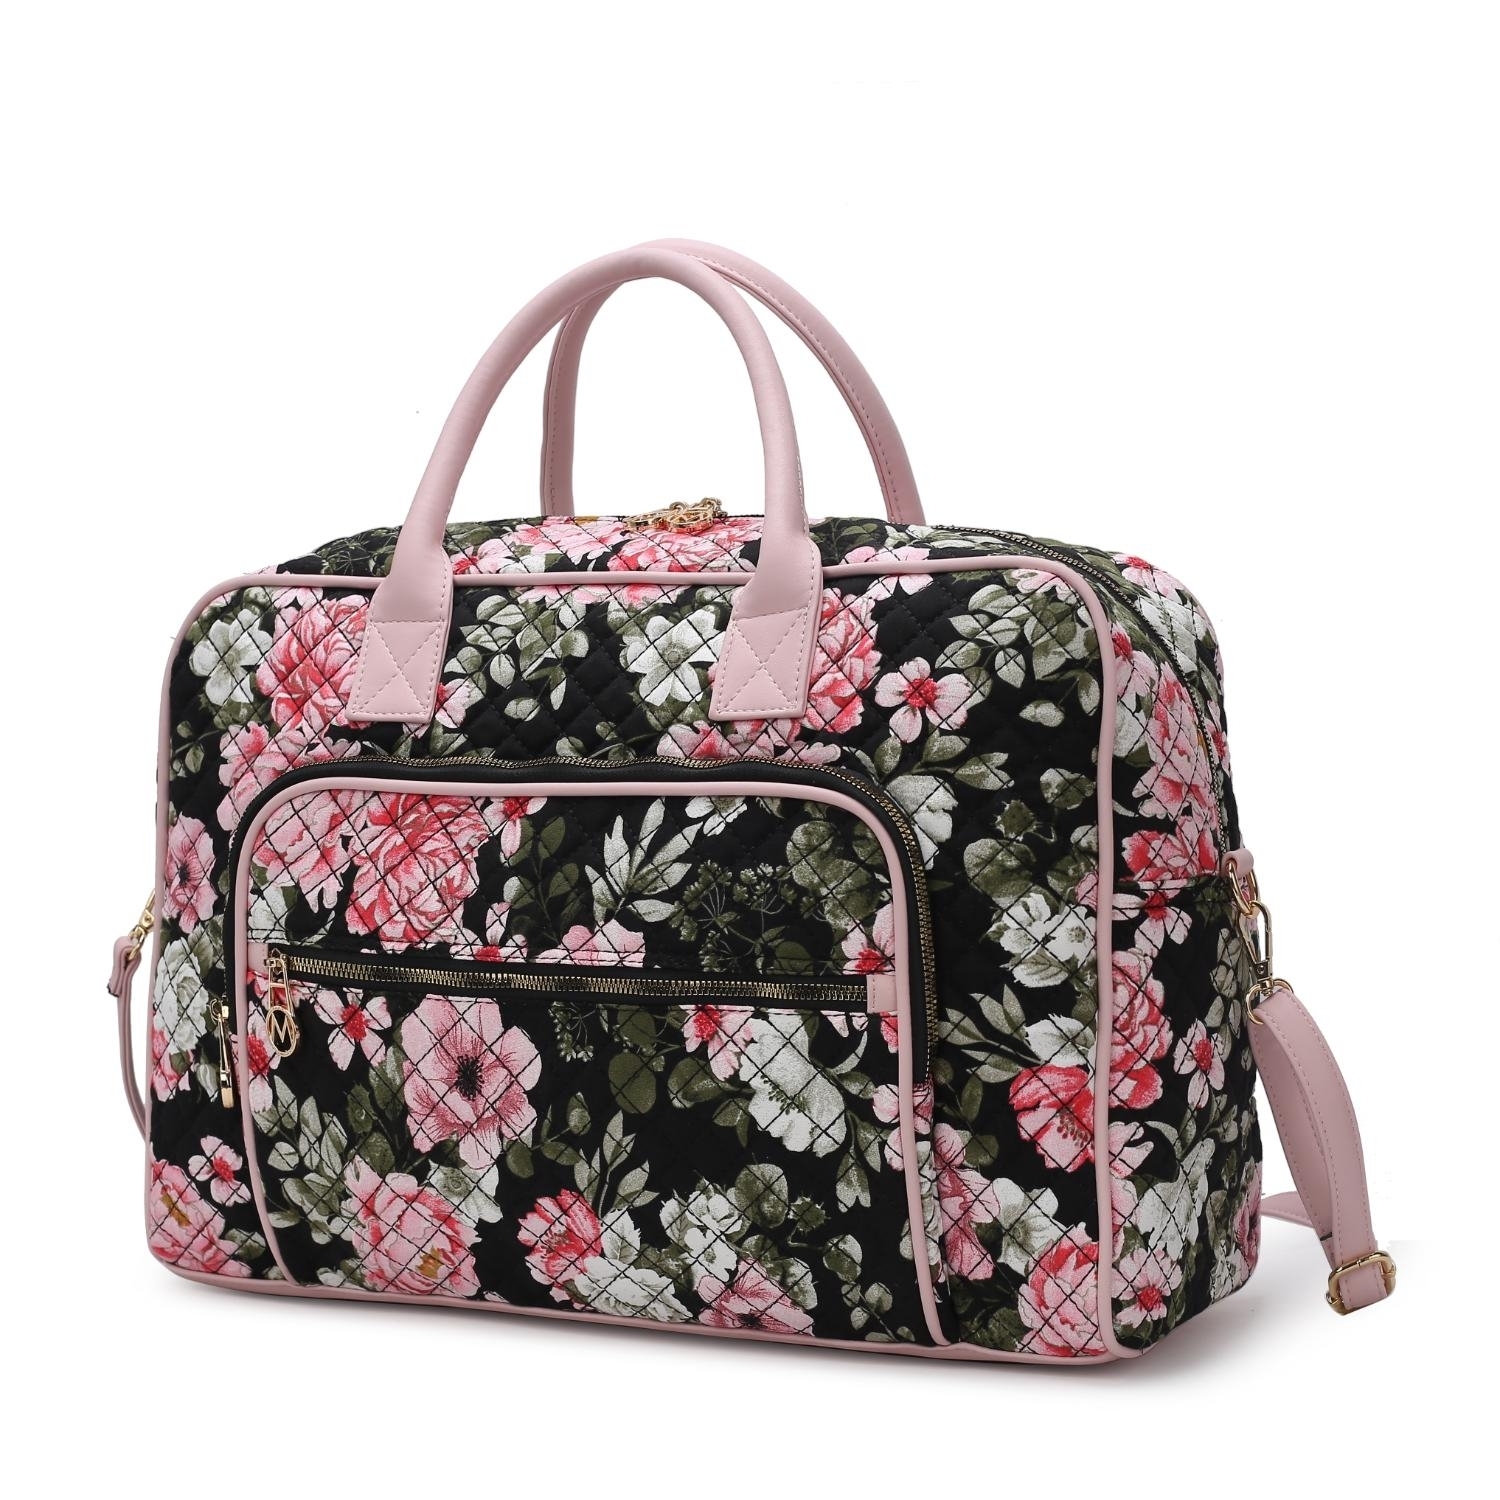 MKF Collection Jayla Quilted Cotton Botanical Pattern Women's Duffle Bag By Mia K - Black